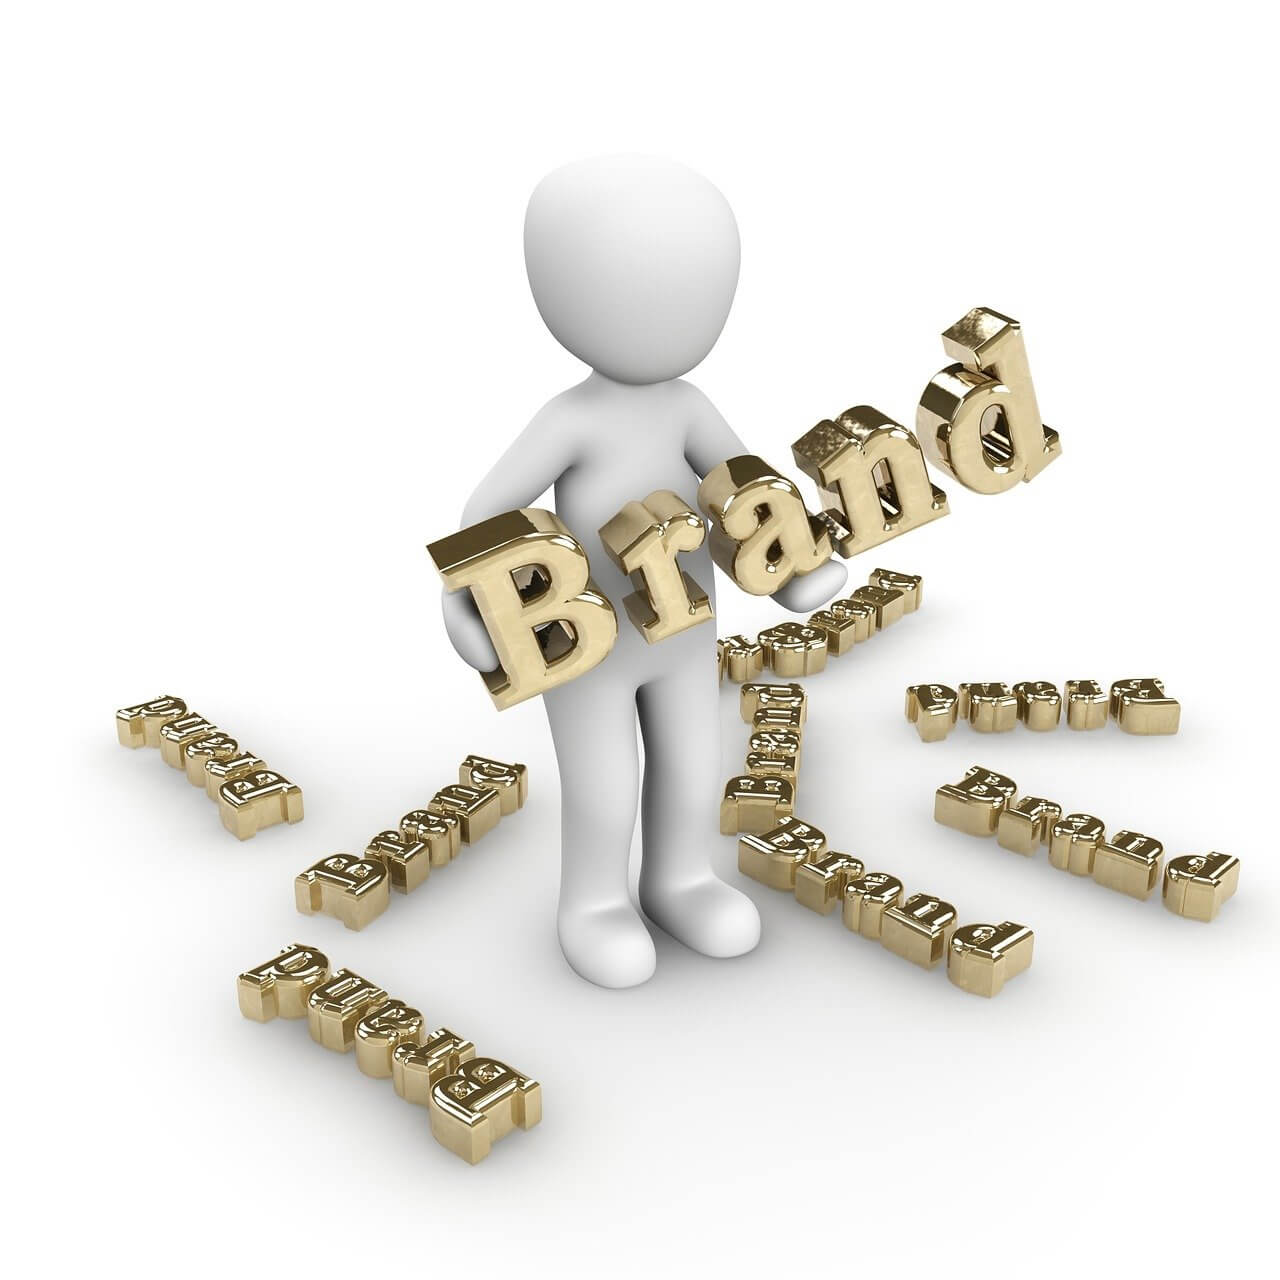 Building Brand Awareness and Trust